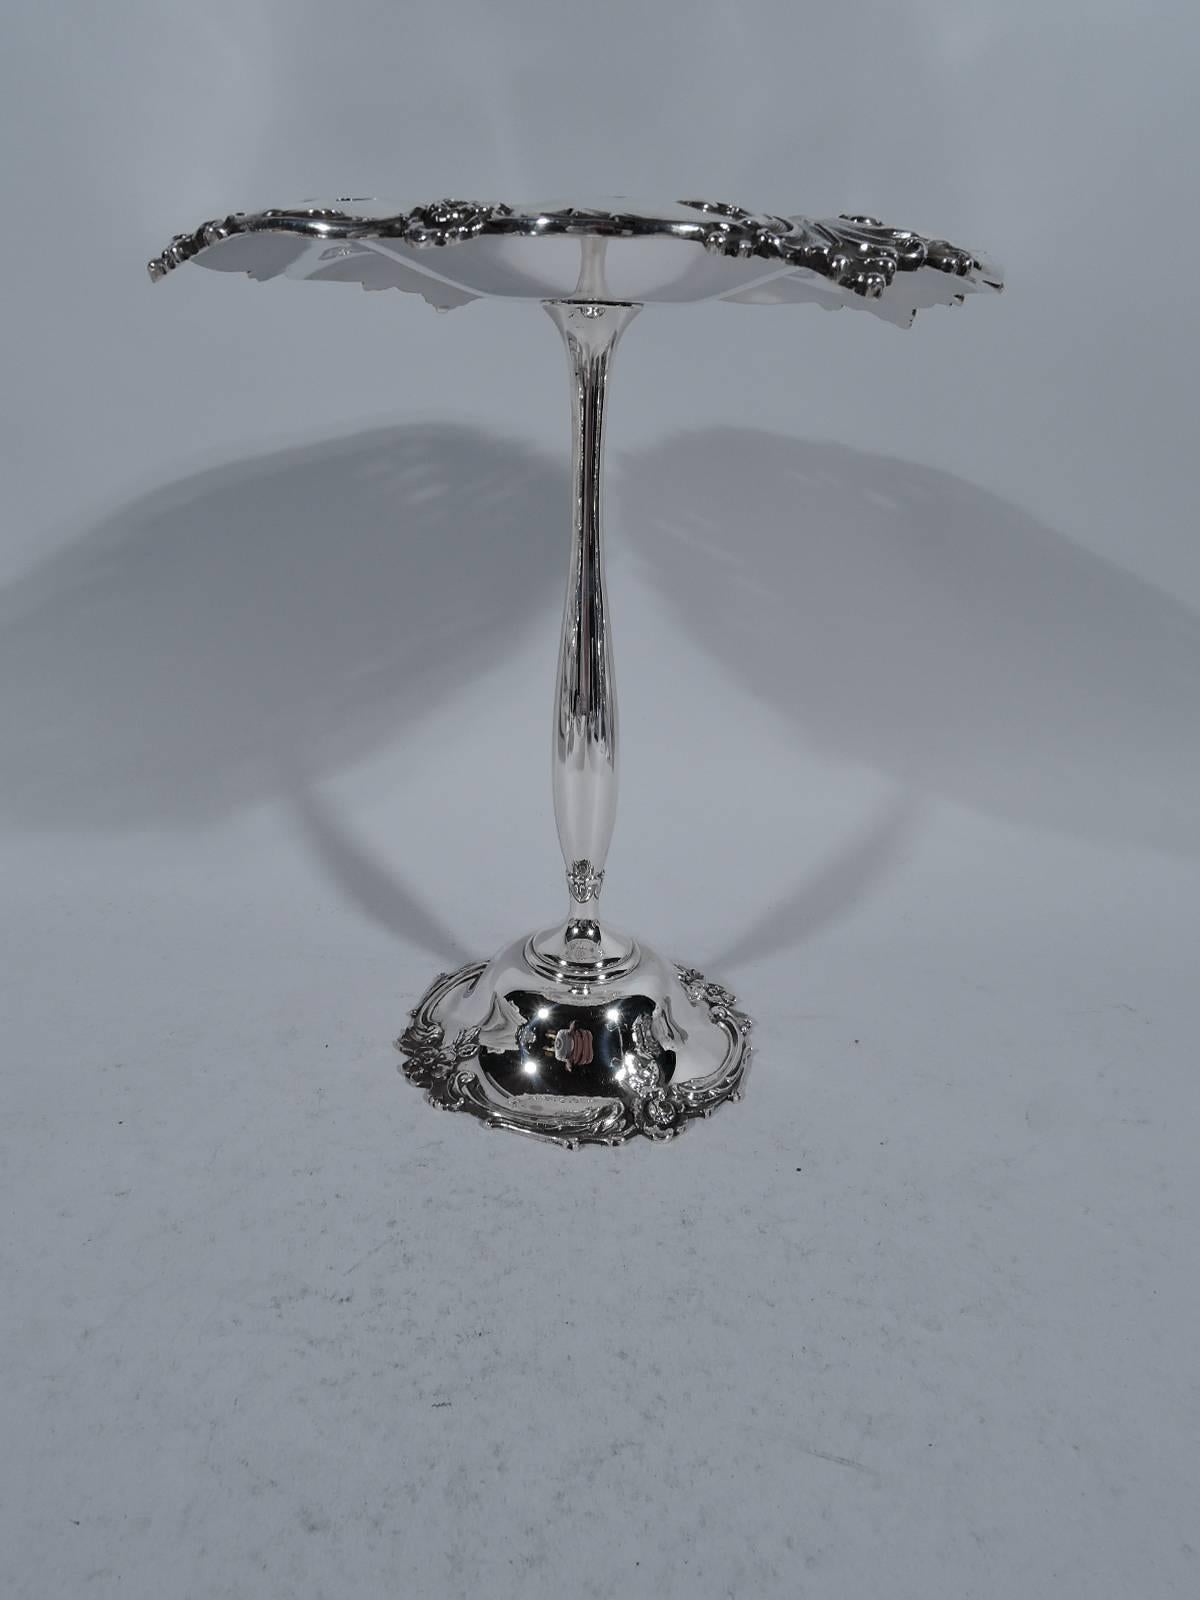 Sterling silver compote. Made by Tiffany & Co. in New York. Shallow bowl, thin baluster shaft, and dome foot. Scrolled rims with leaves and flowers. Bowl has discreet piercing. Traditional ornament on an unusual (that is, tall) form. Hallmark